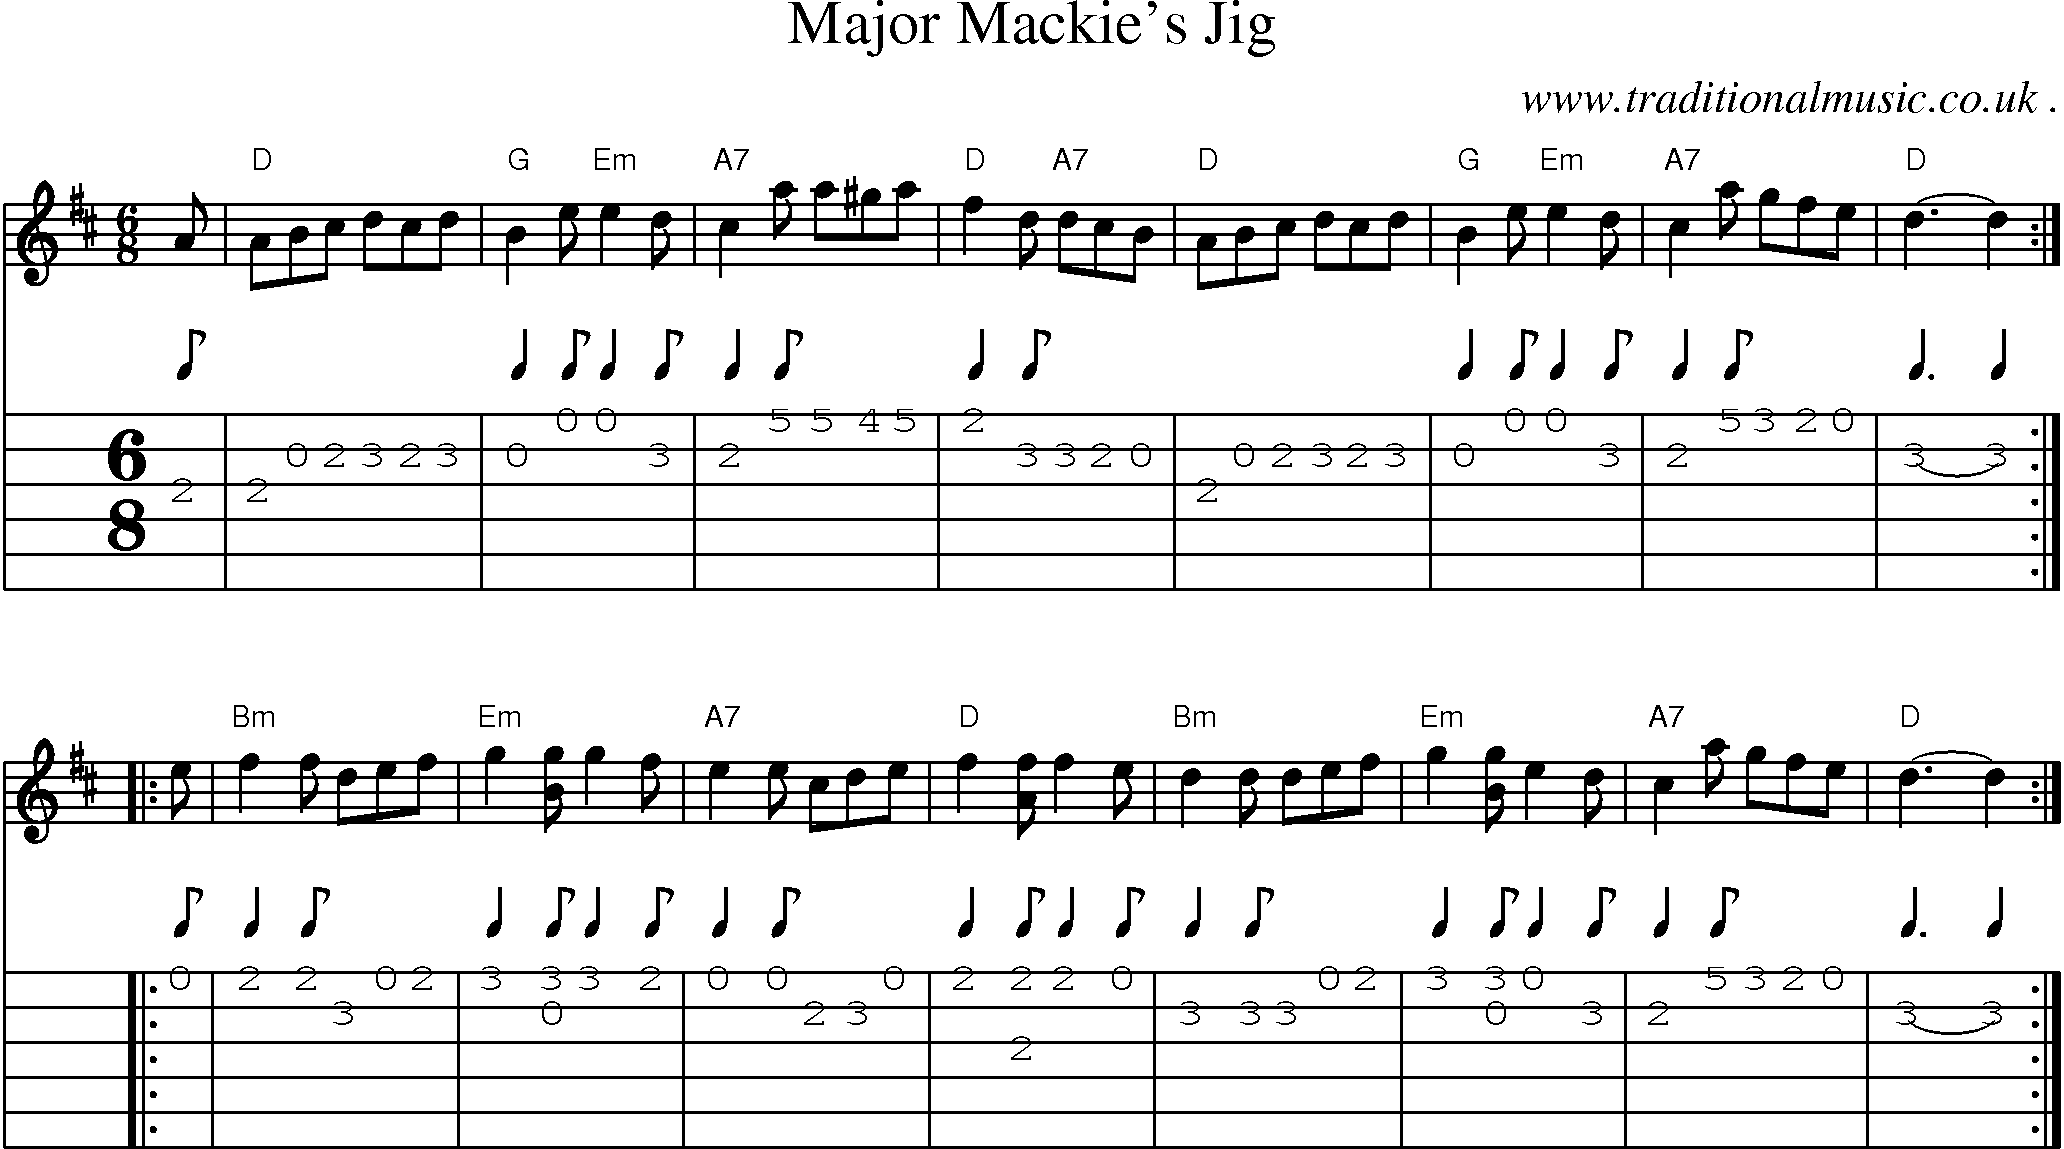 Sheet-music  score, Chords and Guitar Tabs for Major Mackies Jig